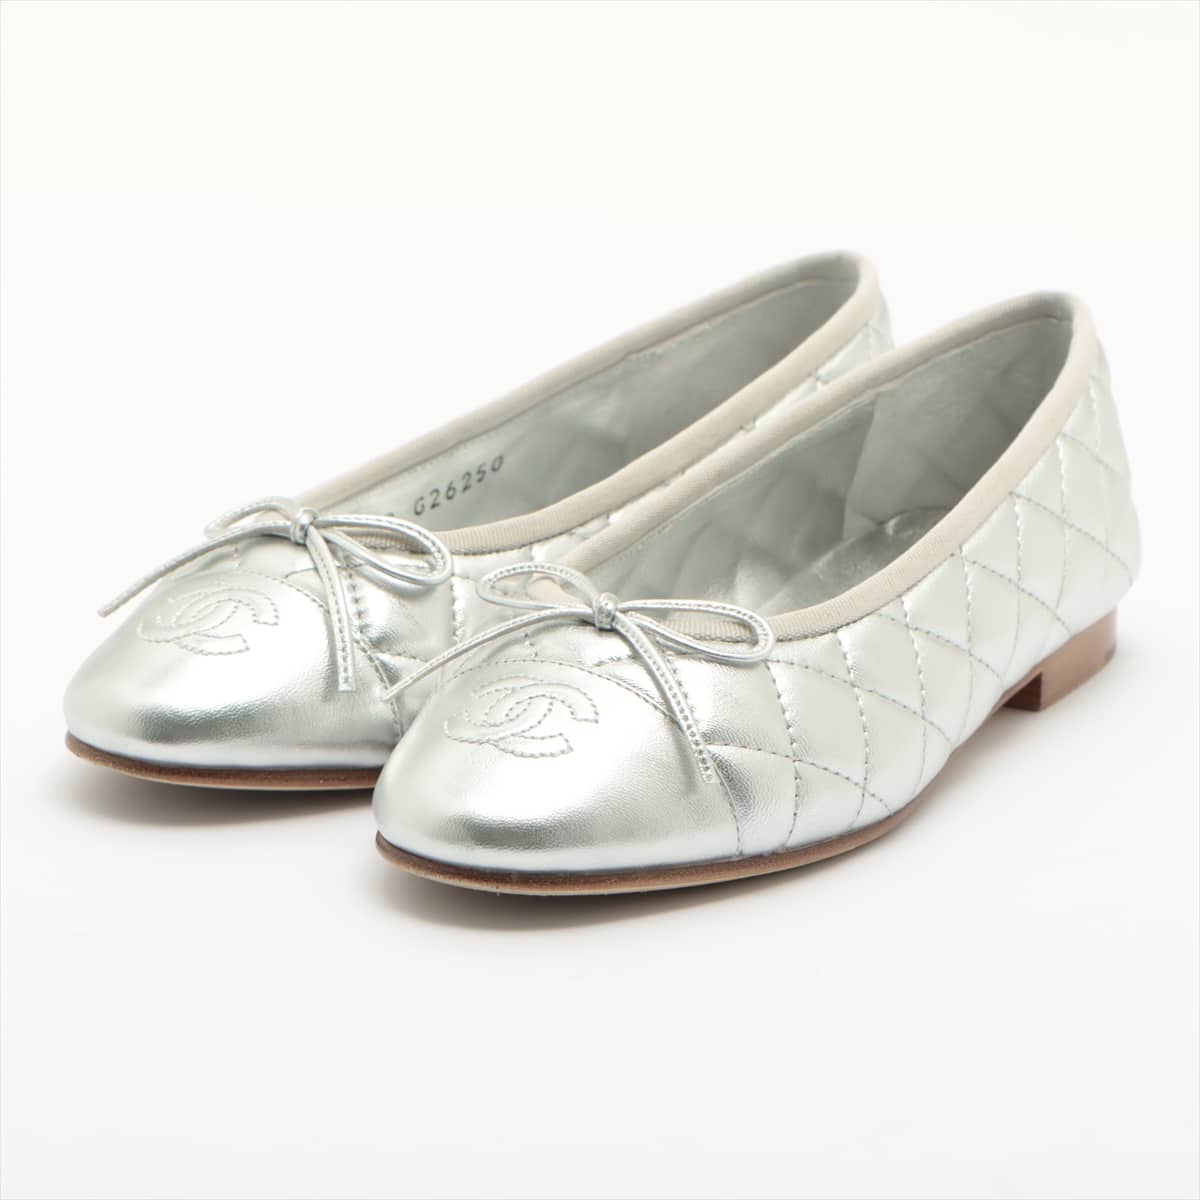 Chanel Coco Mark Matelasse Leather Ballet shoes 37C Ladies' Silver G26250